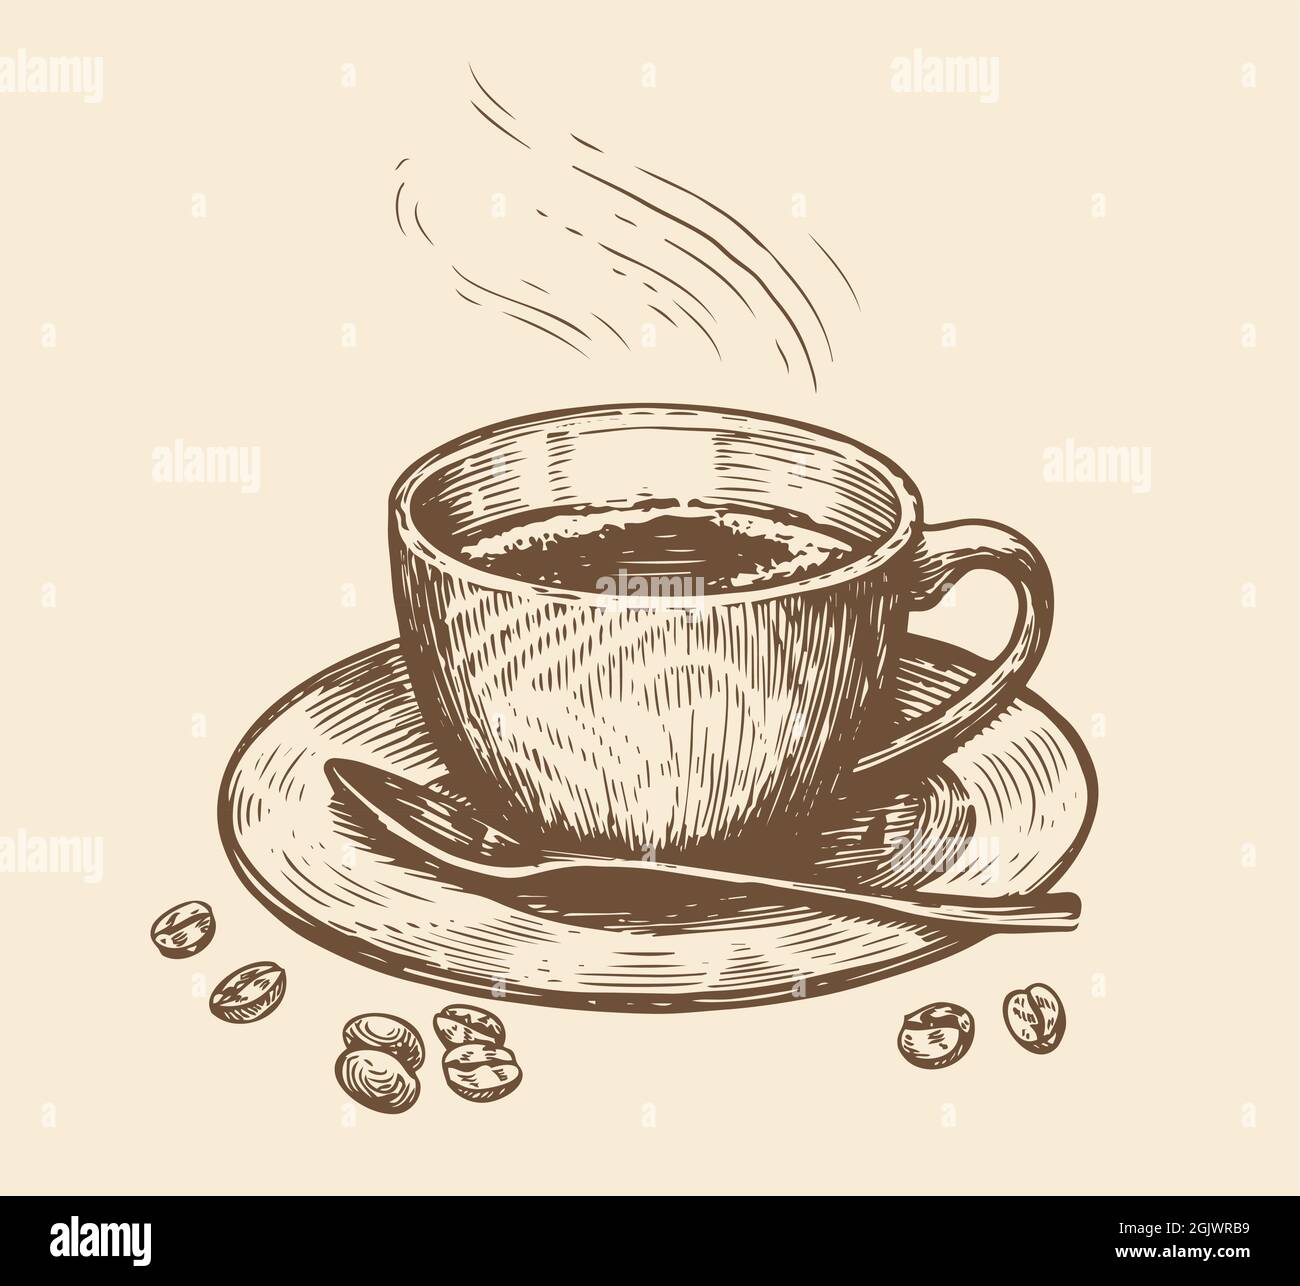 Coffee Hand Drawn Hand With Roasted Beans Sketch Stock Illustration   Download Image Now  Coffee  Drink Illustration Drawing  Activity   iStock